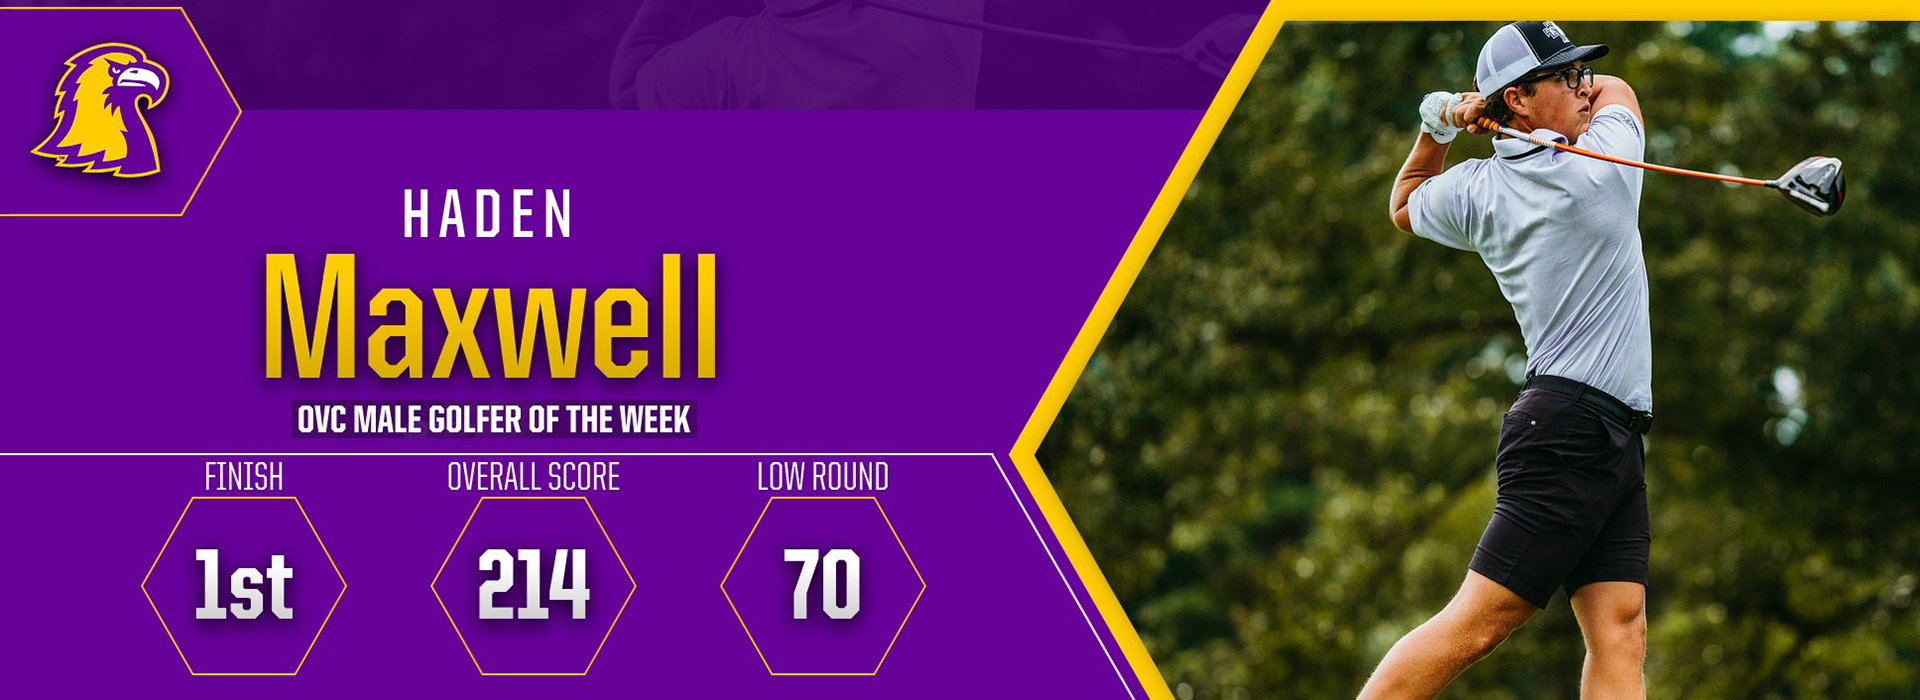 Medalist honors leads Maxwell to second OVC Male Golfer of the Week nod